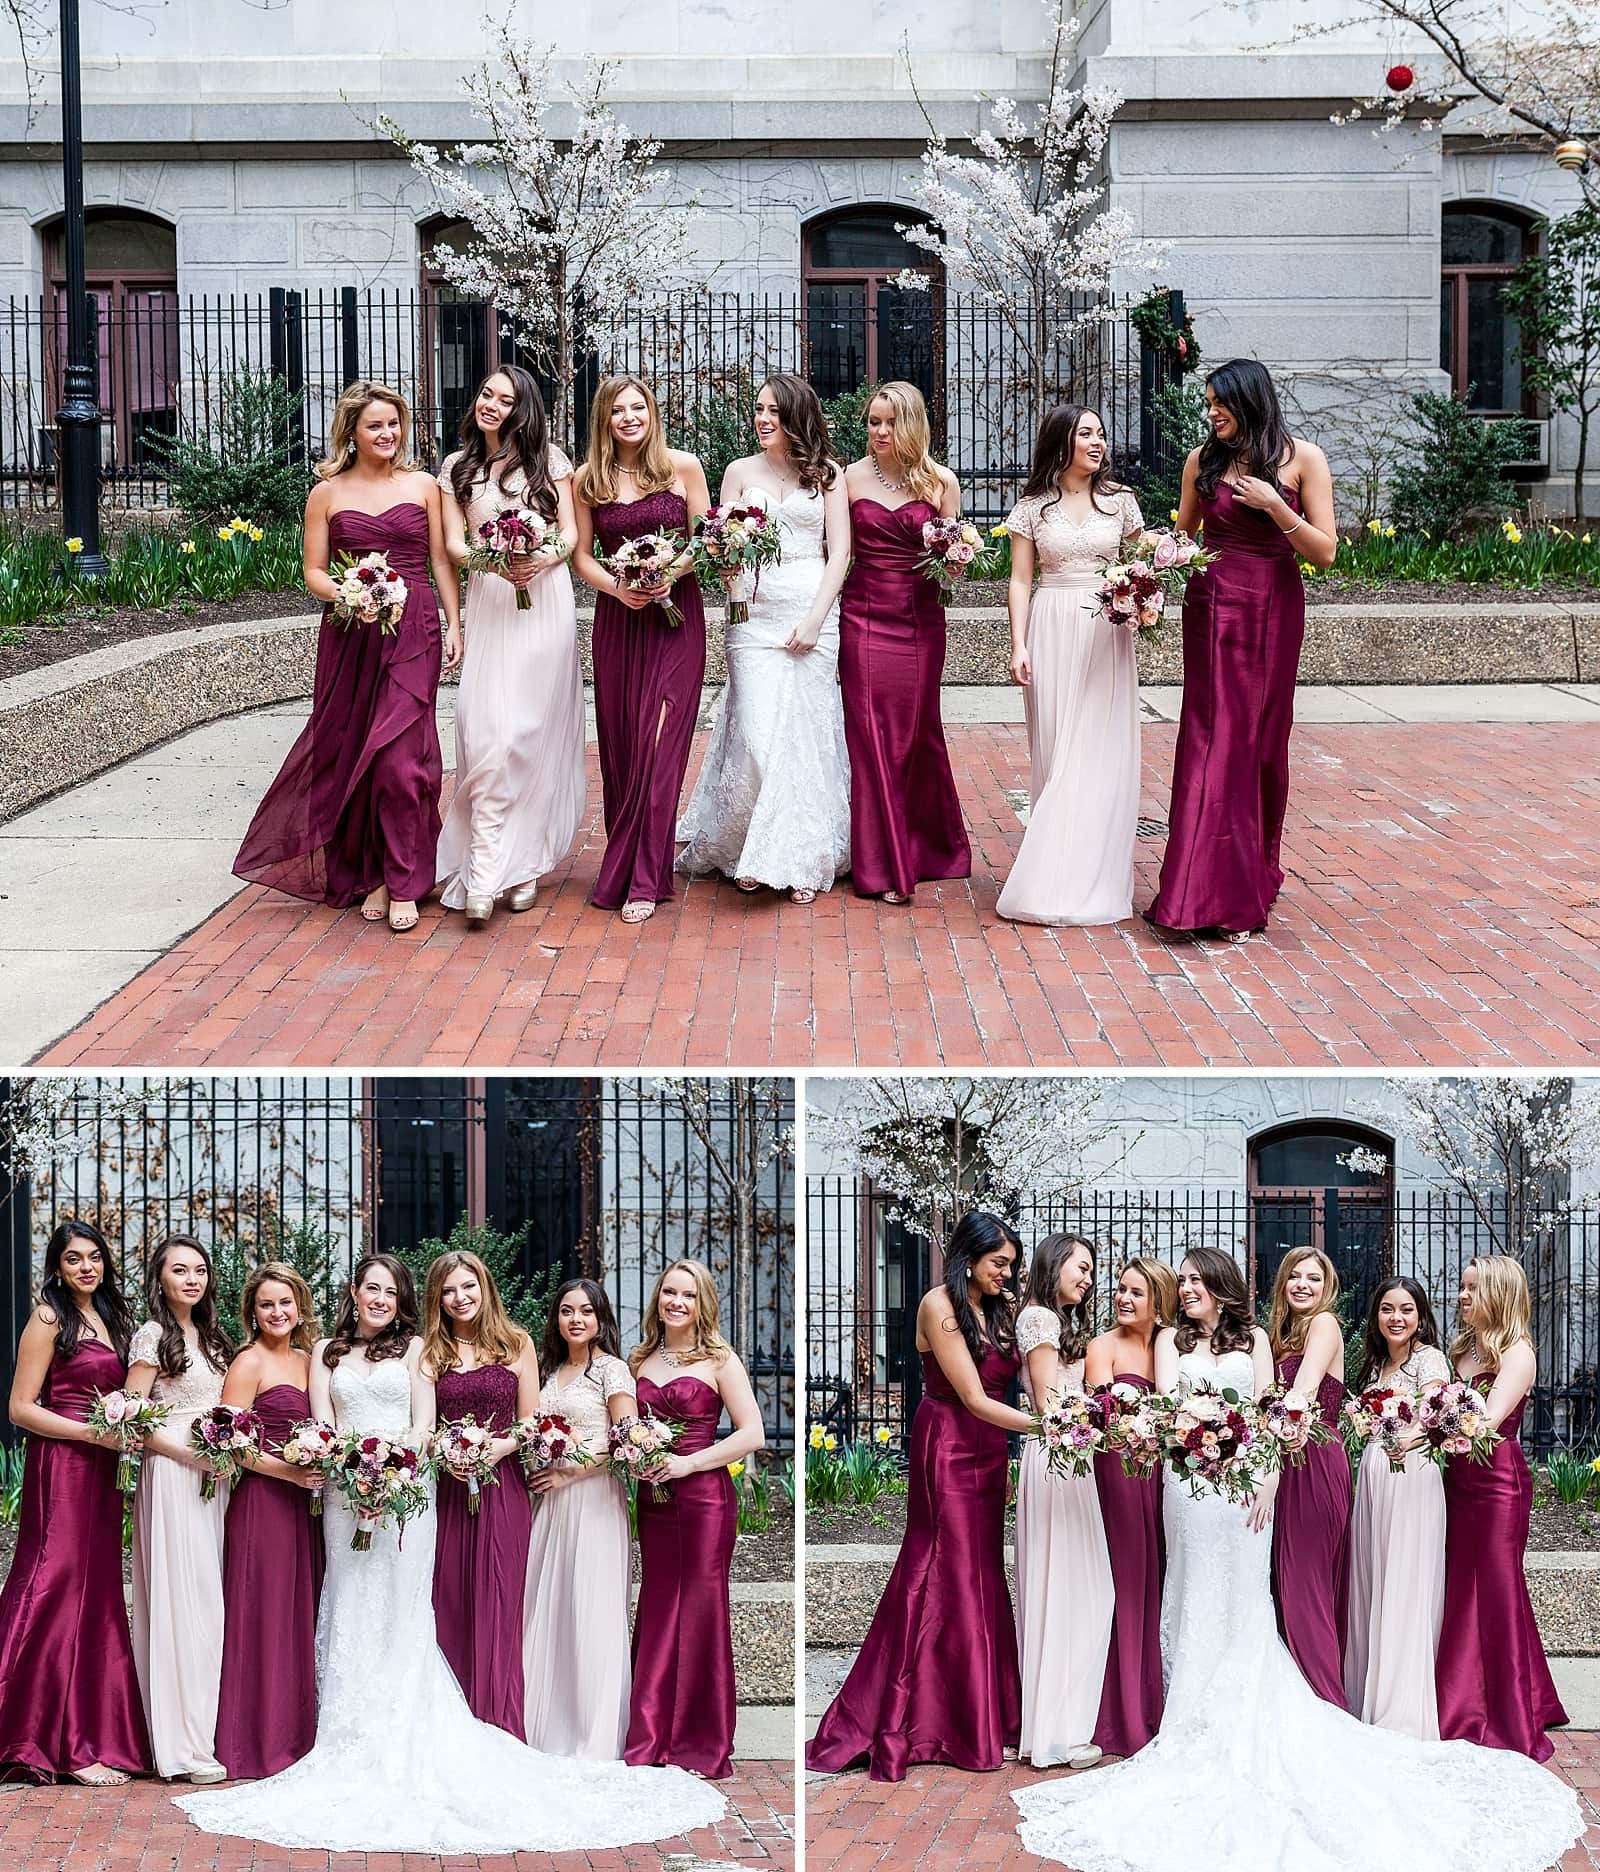 Bridal party portraits with girls laughing and holding out flowers, college of physicians wedding 